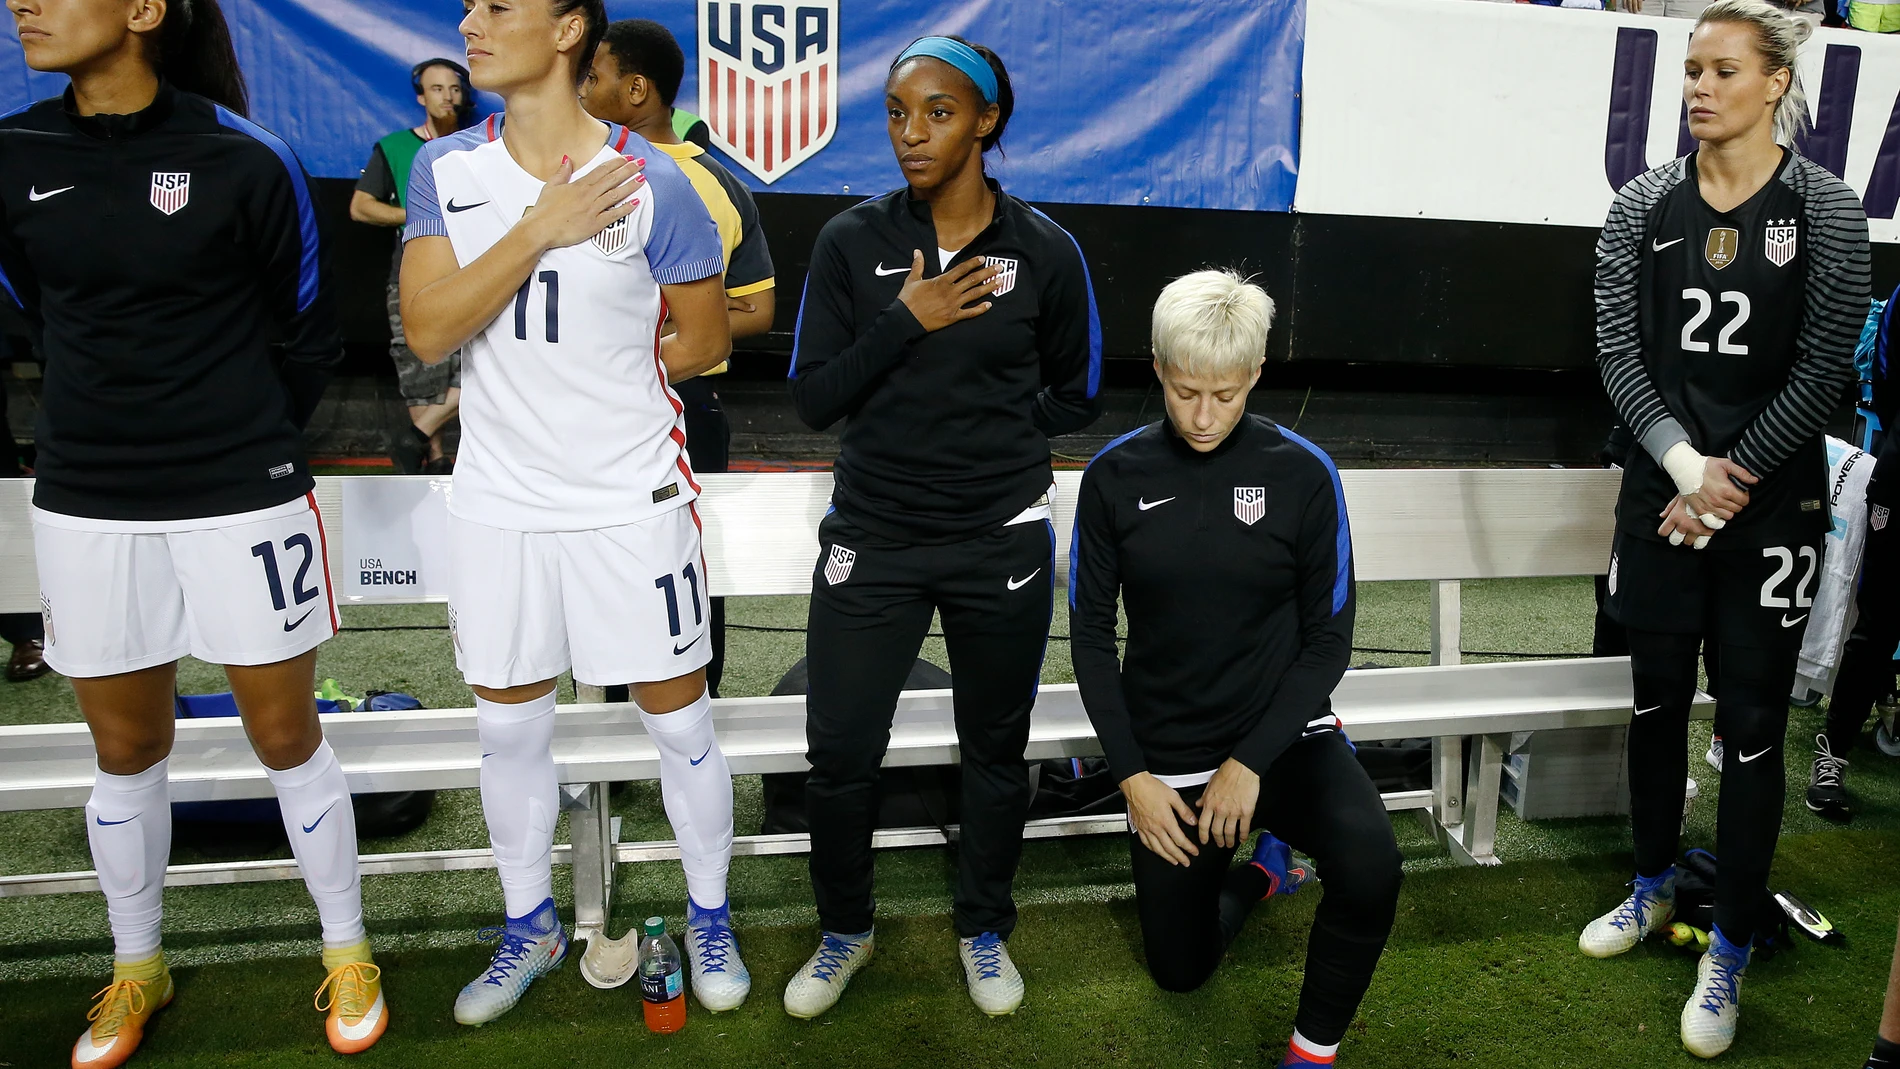 FILE - USA's Megan Rapinoe kneels next to teammates Christen Press (12), Ali Krieger (11), Crystal Dunn (16) and Ashlyn Harris (22) as the U.S. national anthem is played before an exhibition soccer match against Netherlands Sunday, Sept. 18, 2016, in Atlanta. Rapinoe knelt during the national anthem in solidarity with Colin Kaepernick, the former San Francisco 49ers quarterback who knelt during the anthem to call attention to racial inequality.(AP Photo/John Bazemore, File)